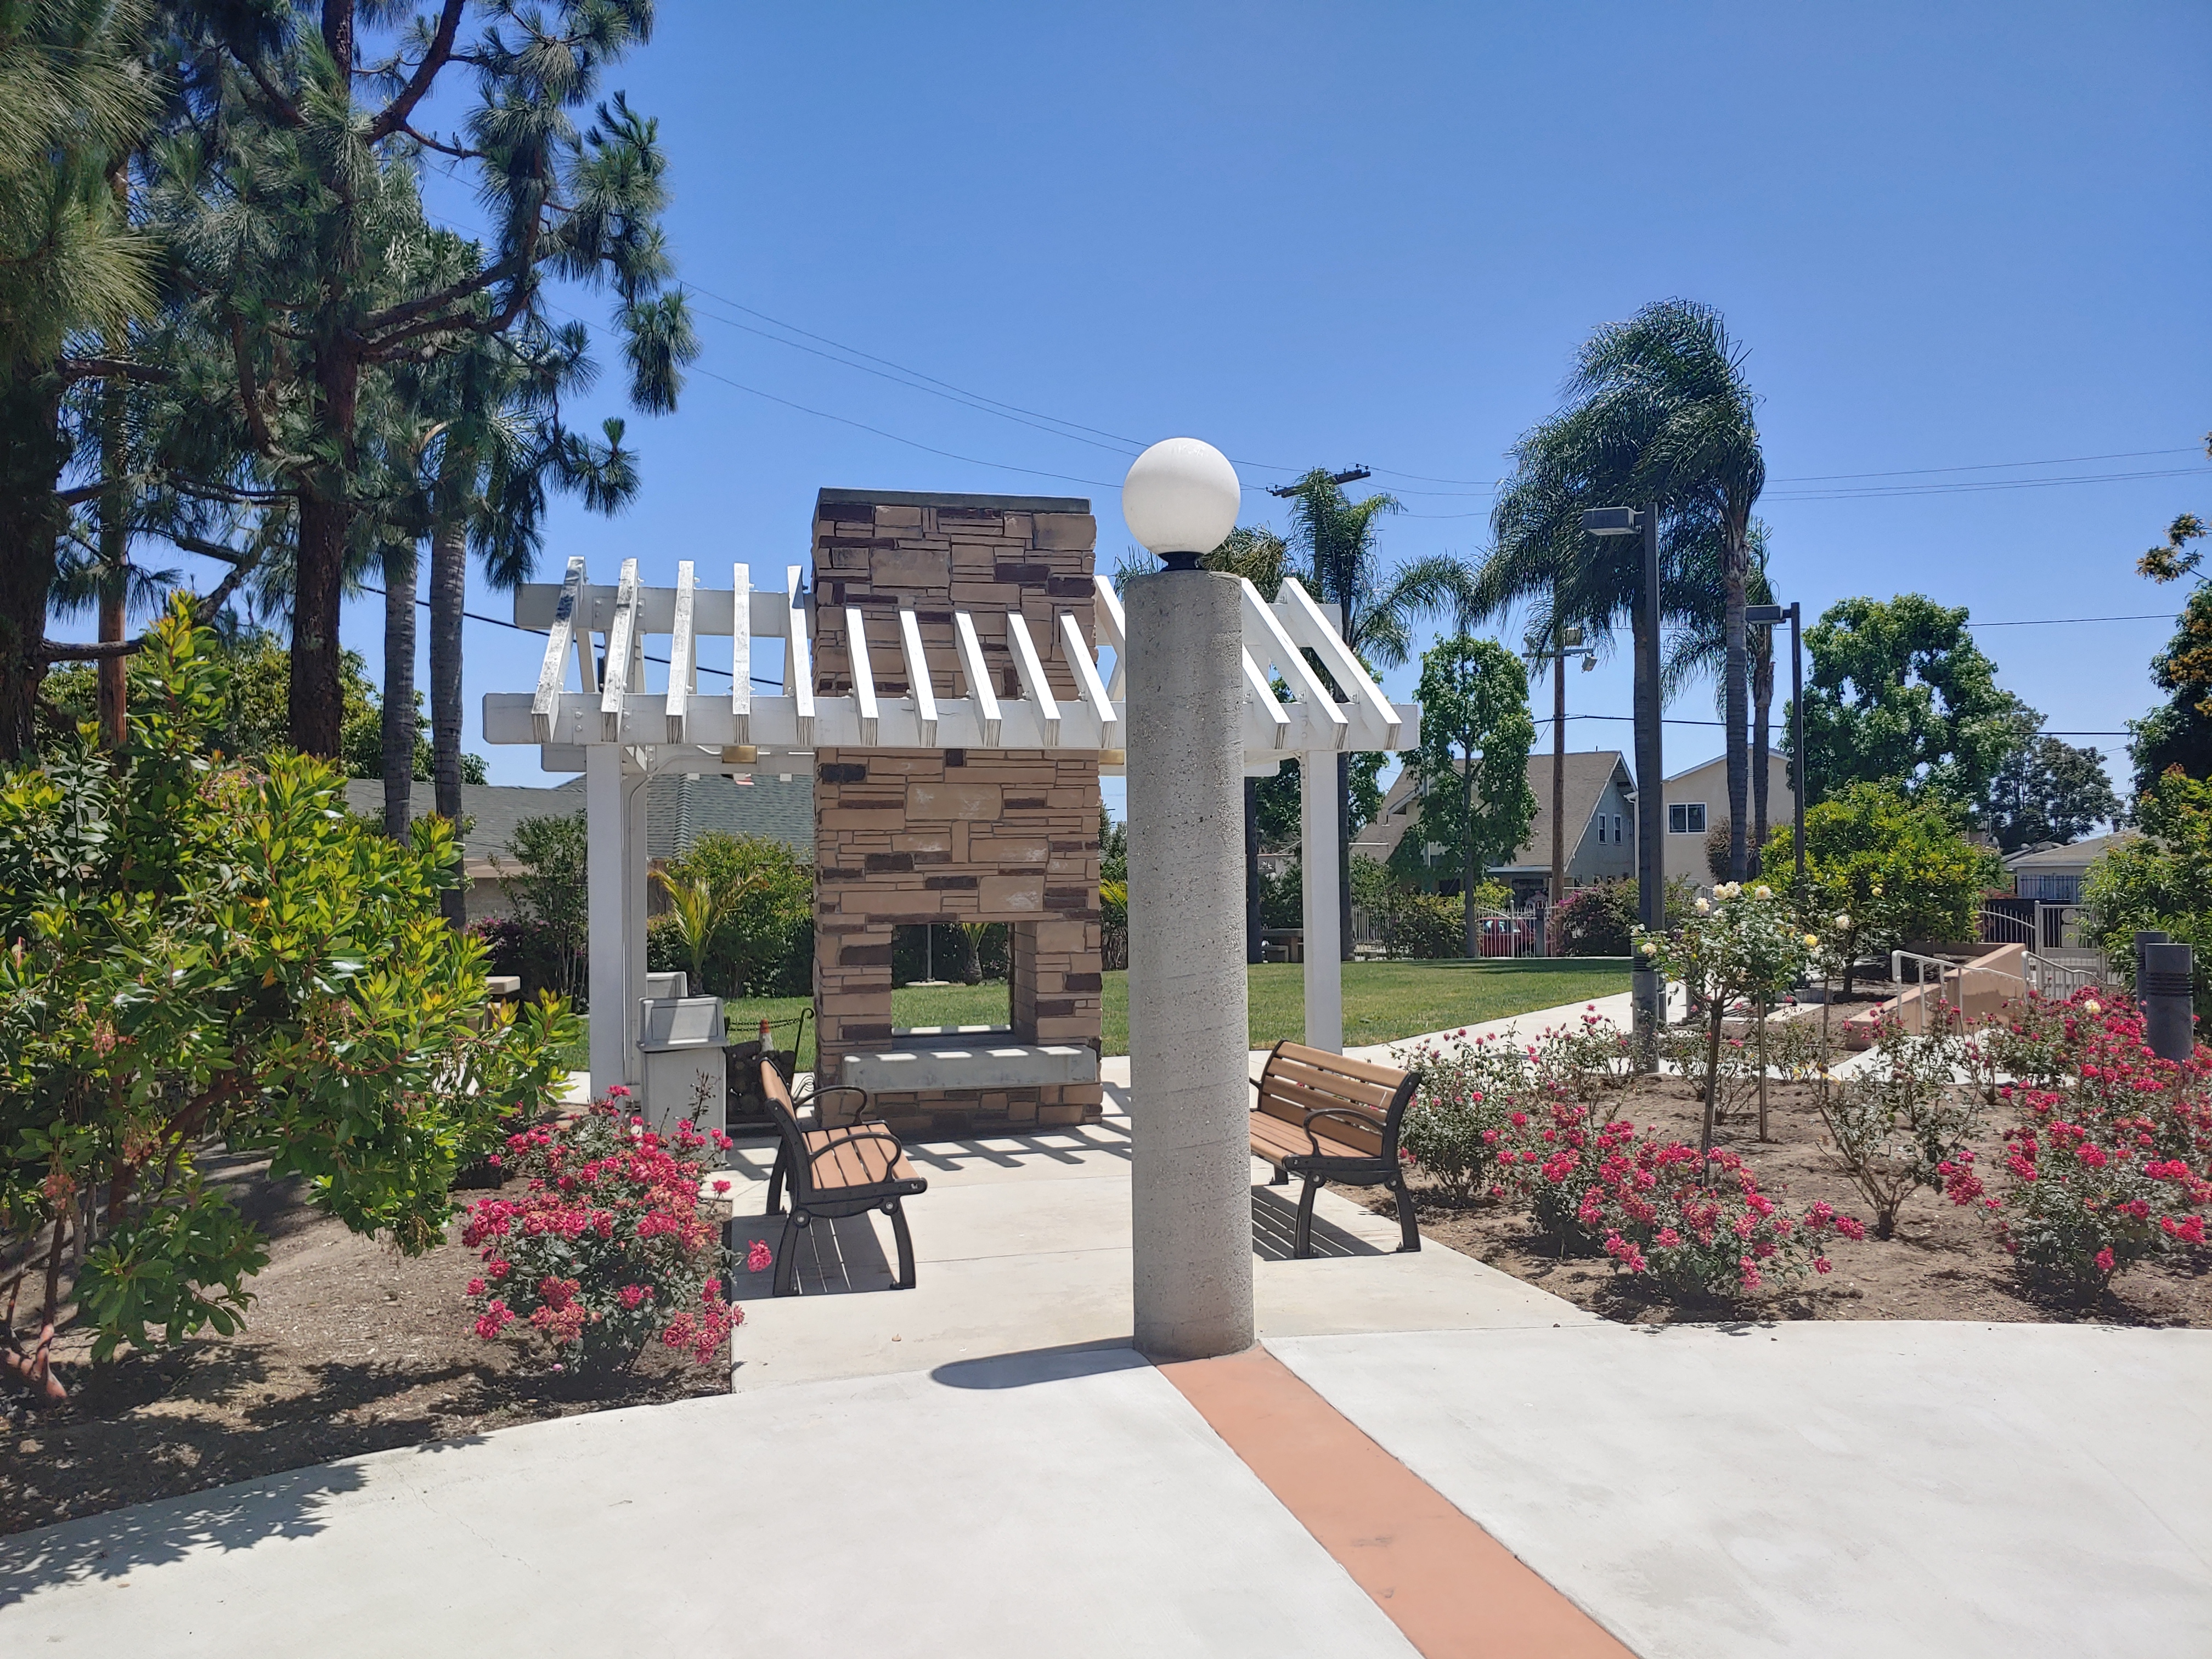 View of rose garden, two benches, white pergola, and built in outdoor fireplace with a grass area in the background.